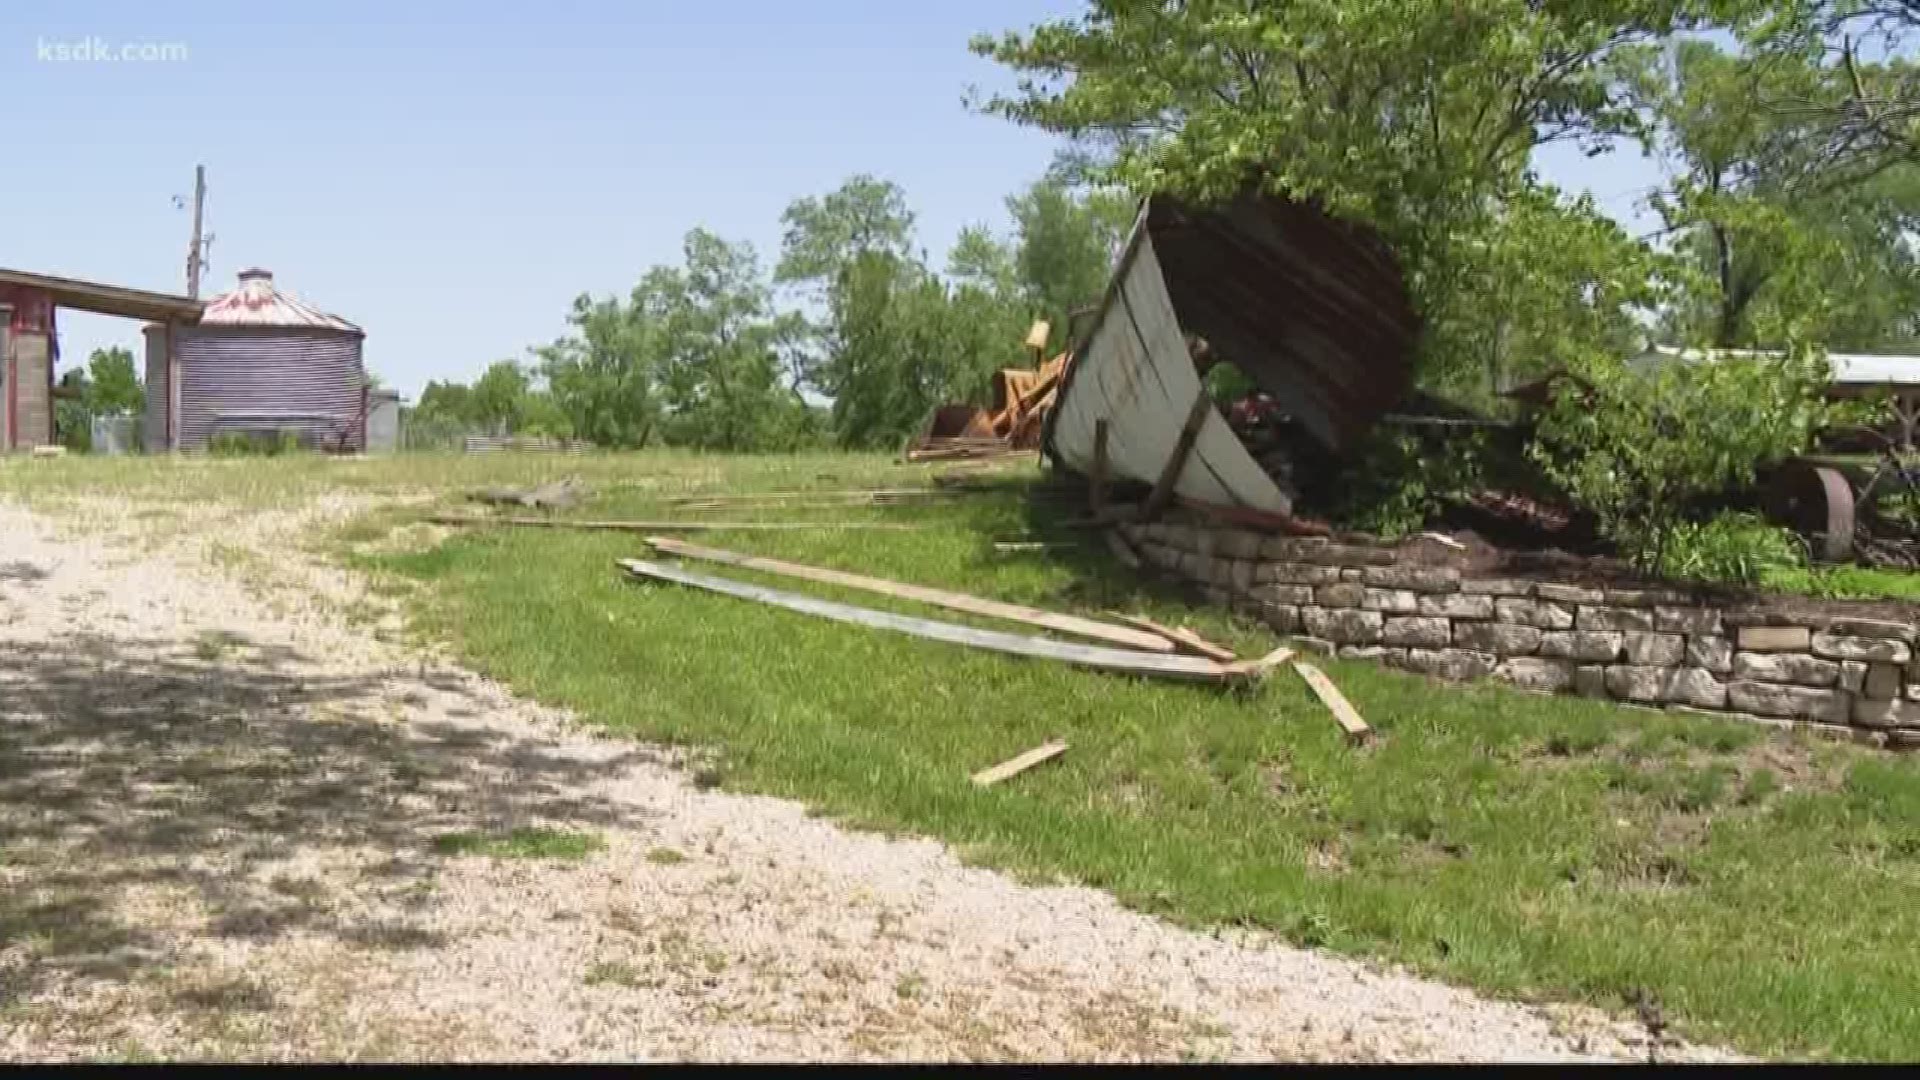 The National Weather Service just wrapped up its survey and says the tornado that touched down in Augusta, Mo was an EF-1, with peak winds of 100 mph.